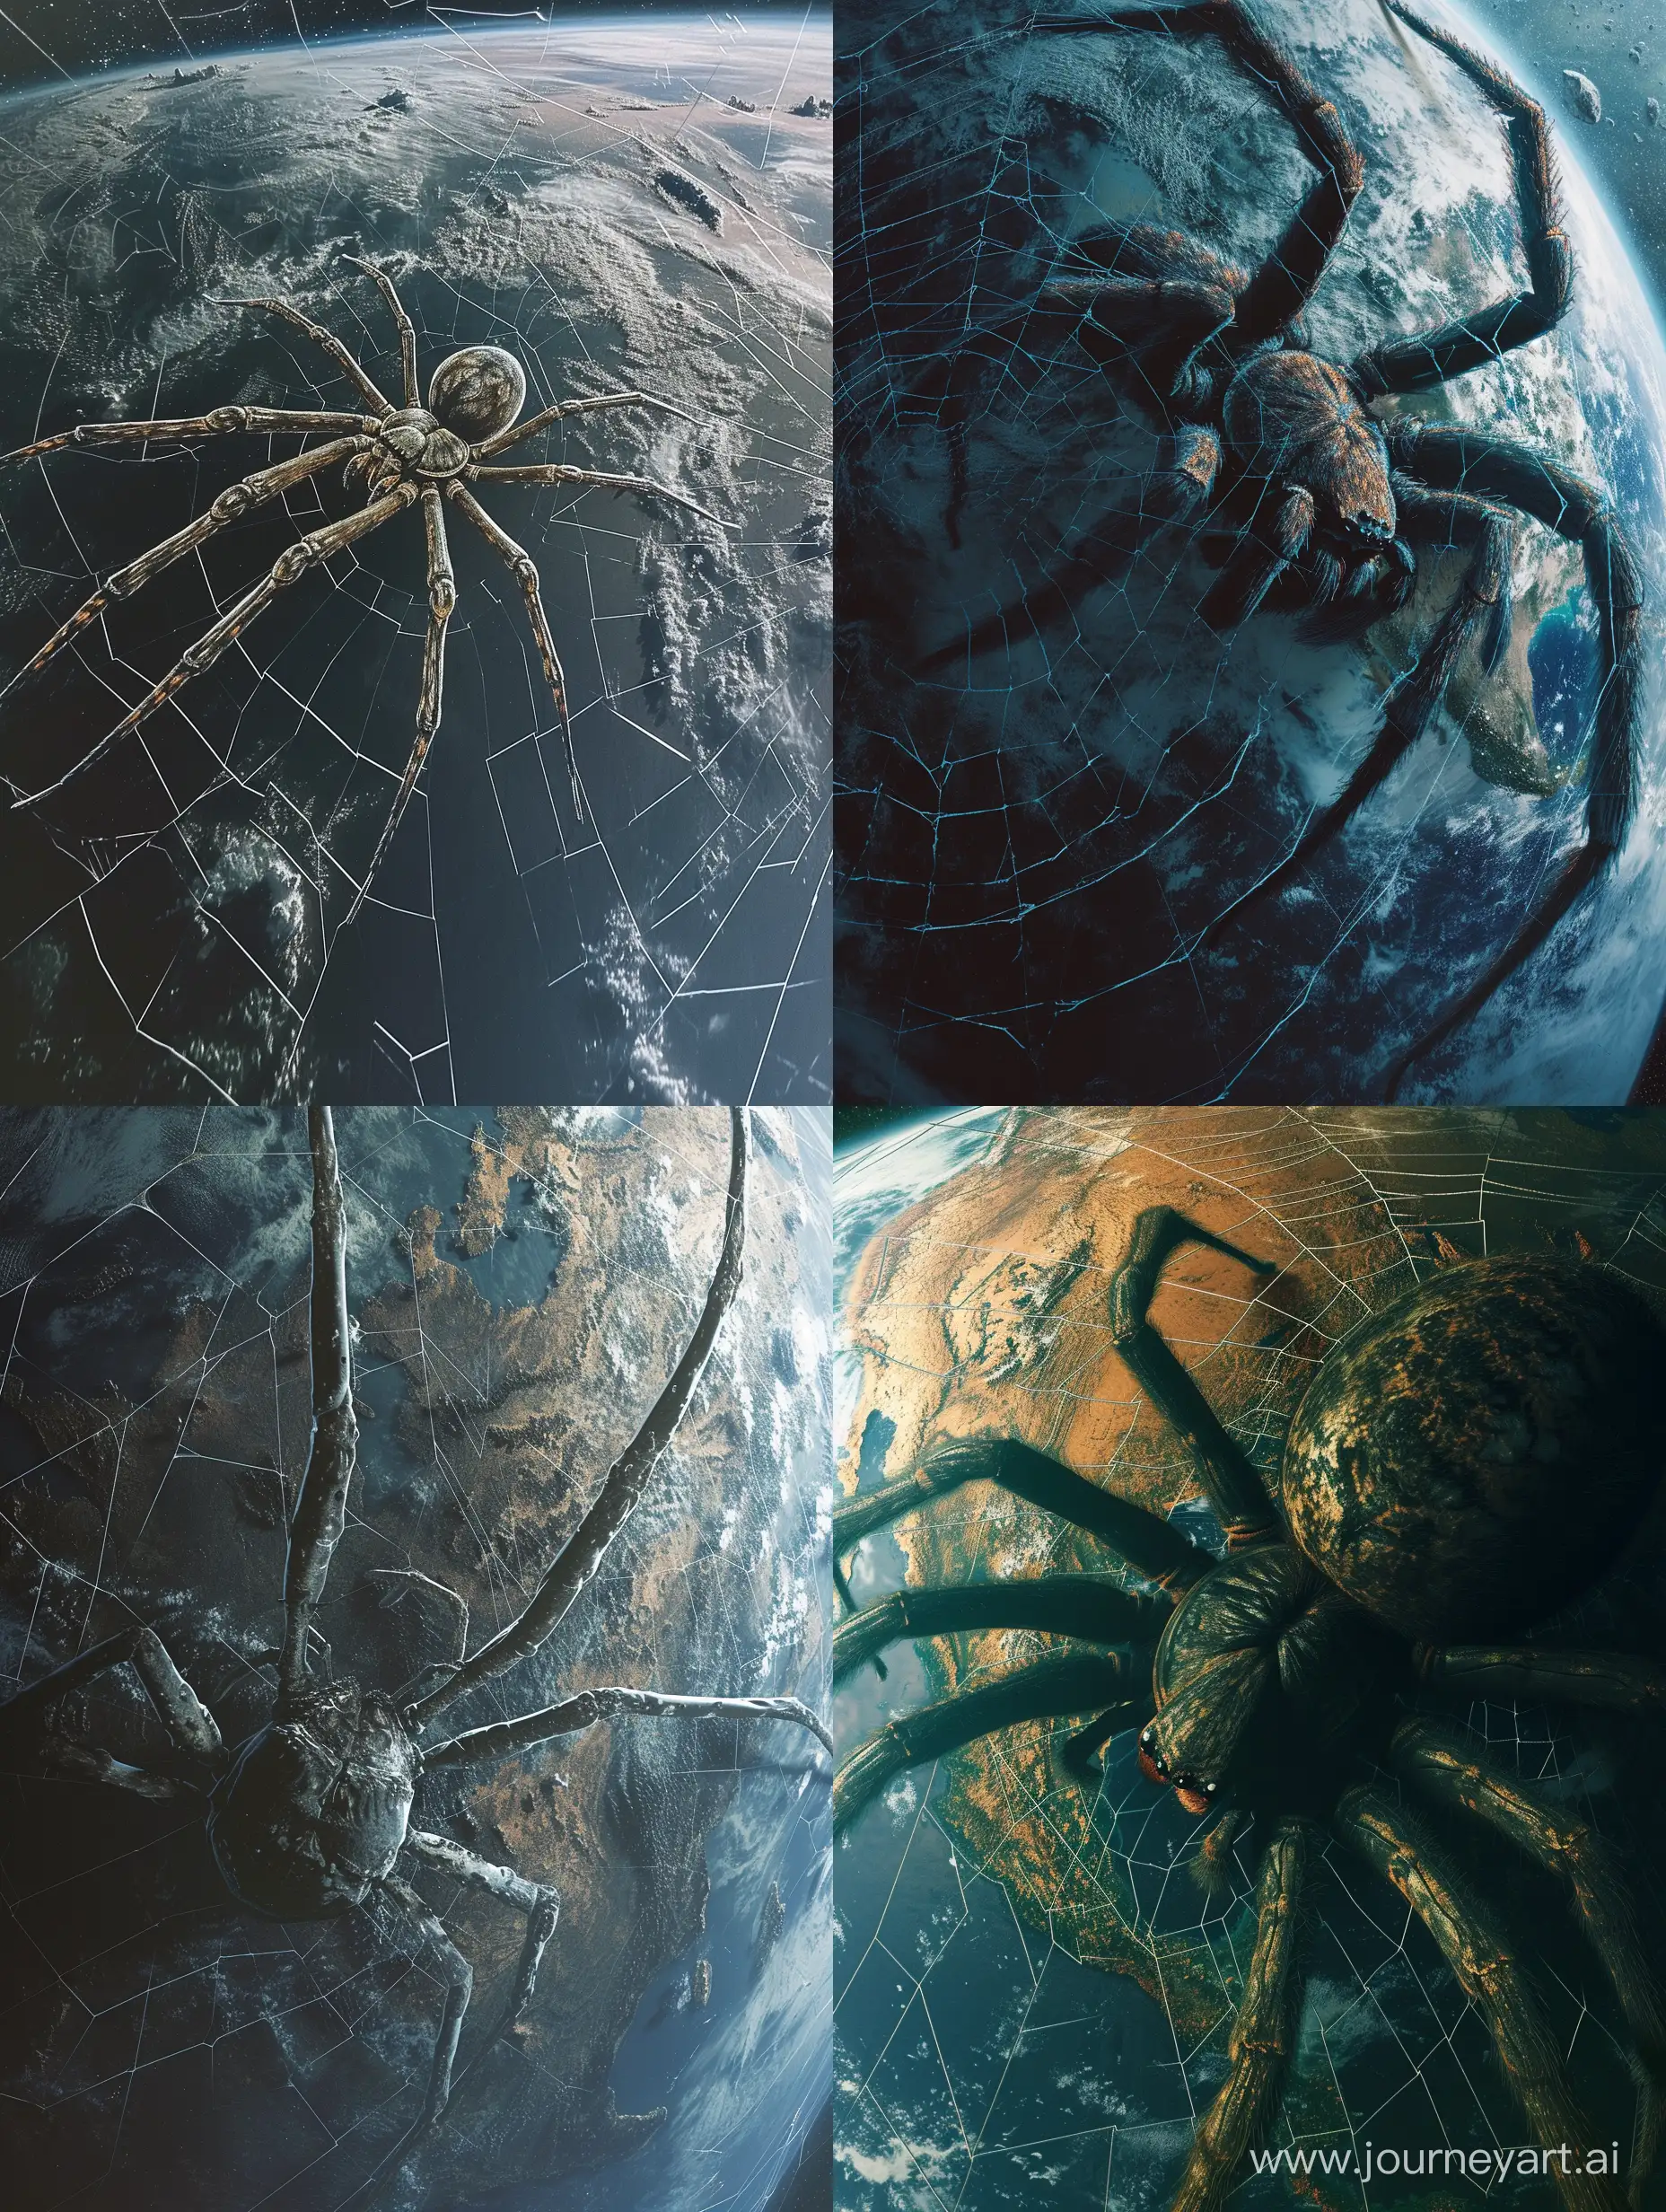 Giant-Spider-Weaving-Intricate-Web-Across-Earth-Surreal-Satellite-View